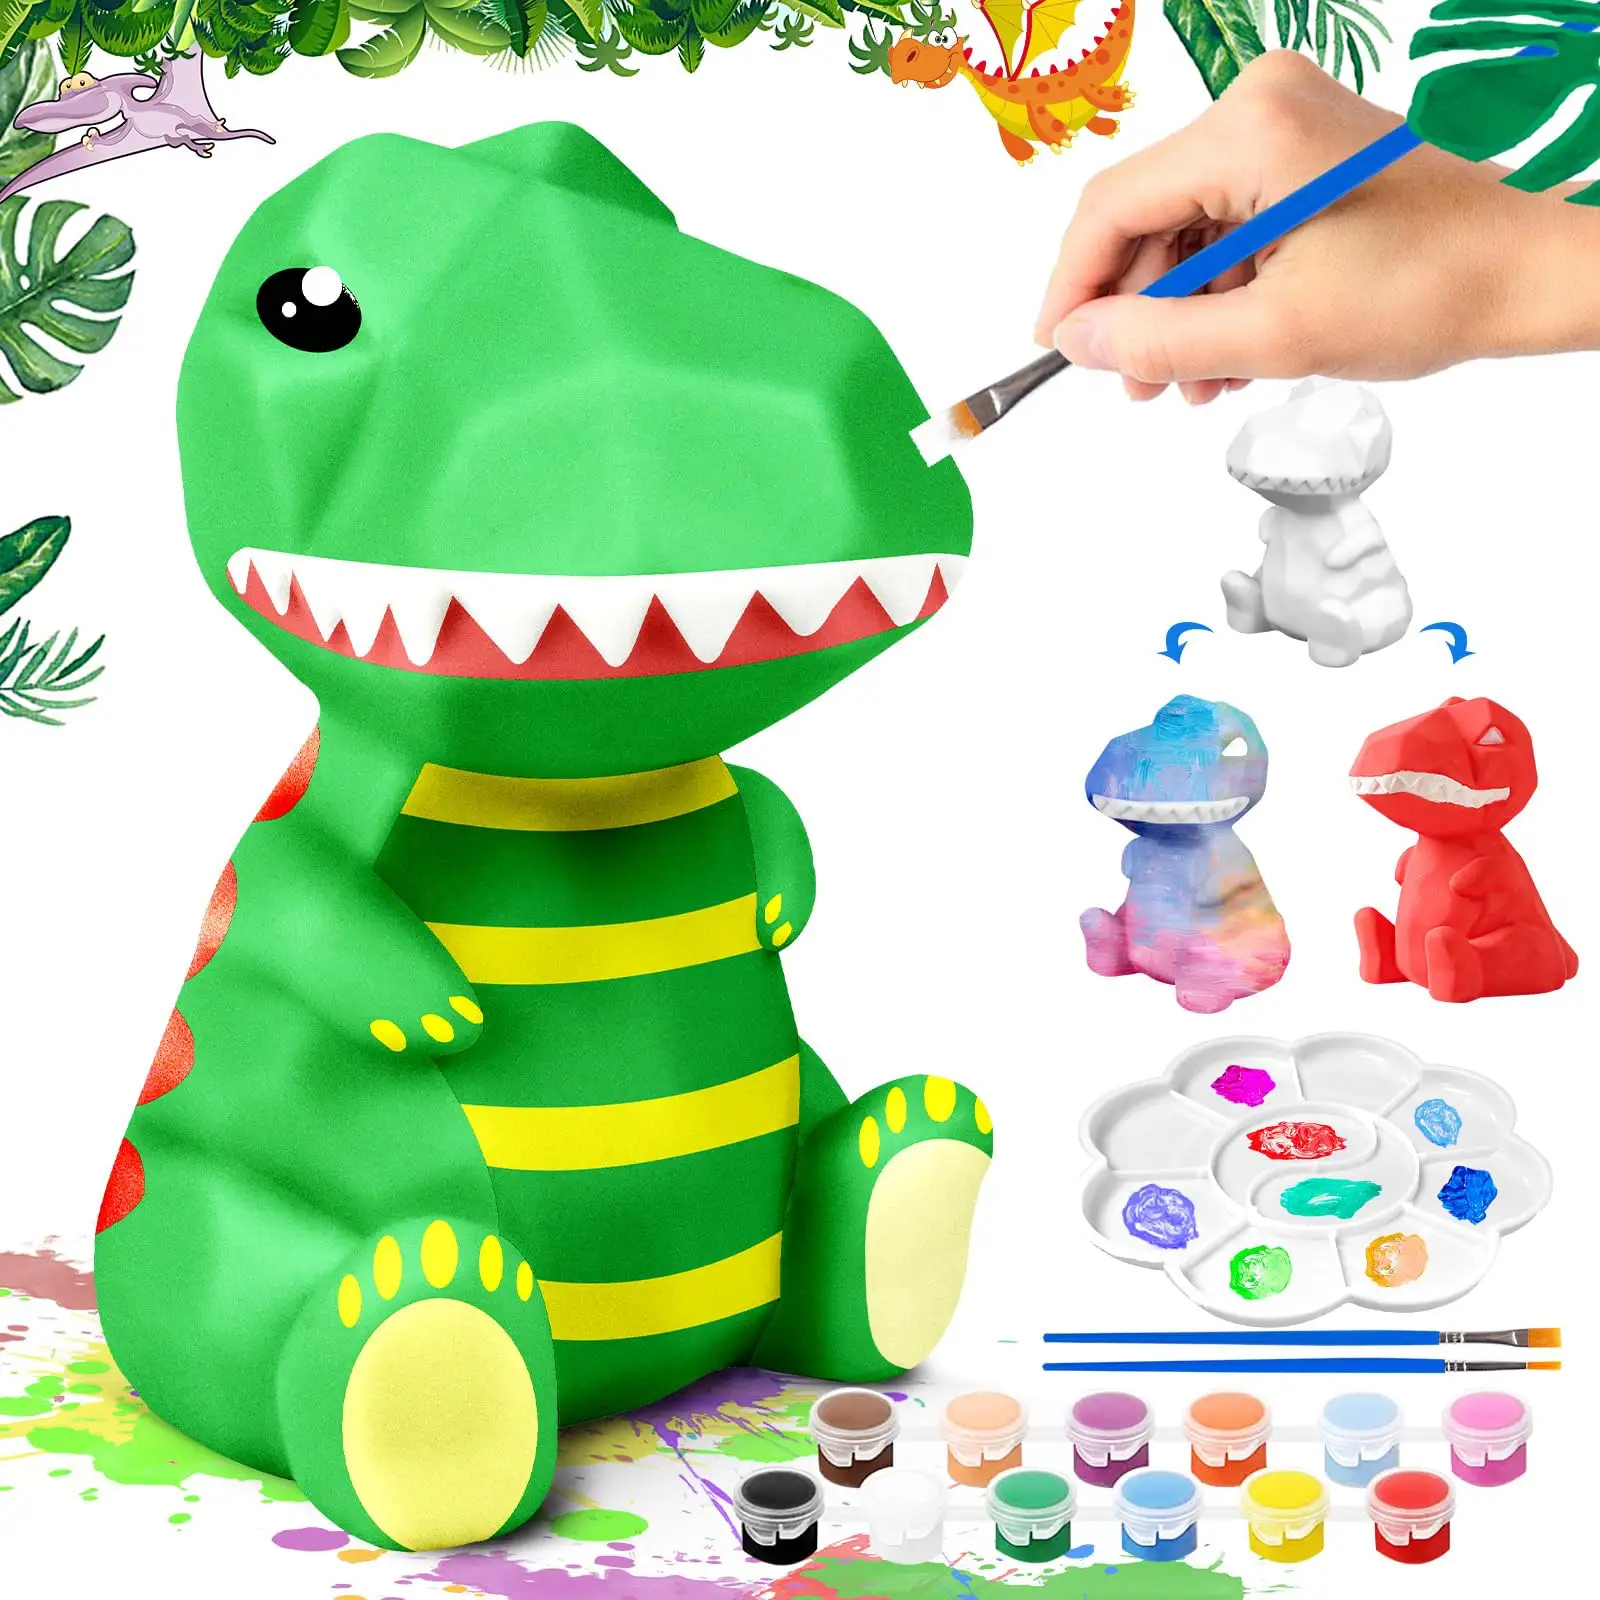 Paint Your Own Dinosaur Lamp Kit, DIY Dinosaur Toy Painting Kit, Art Supplies for Kids 9-12 Arts and Crafts Creative Gifts